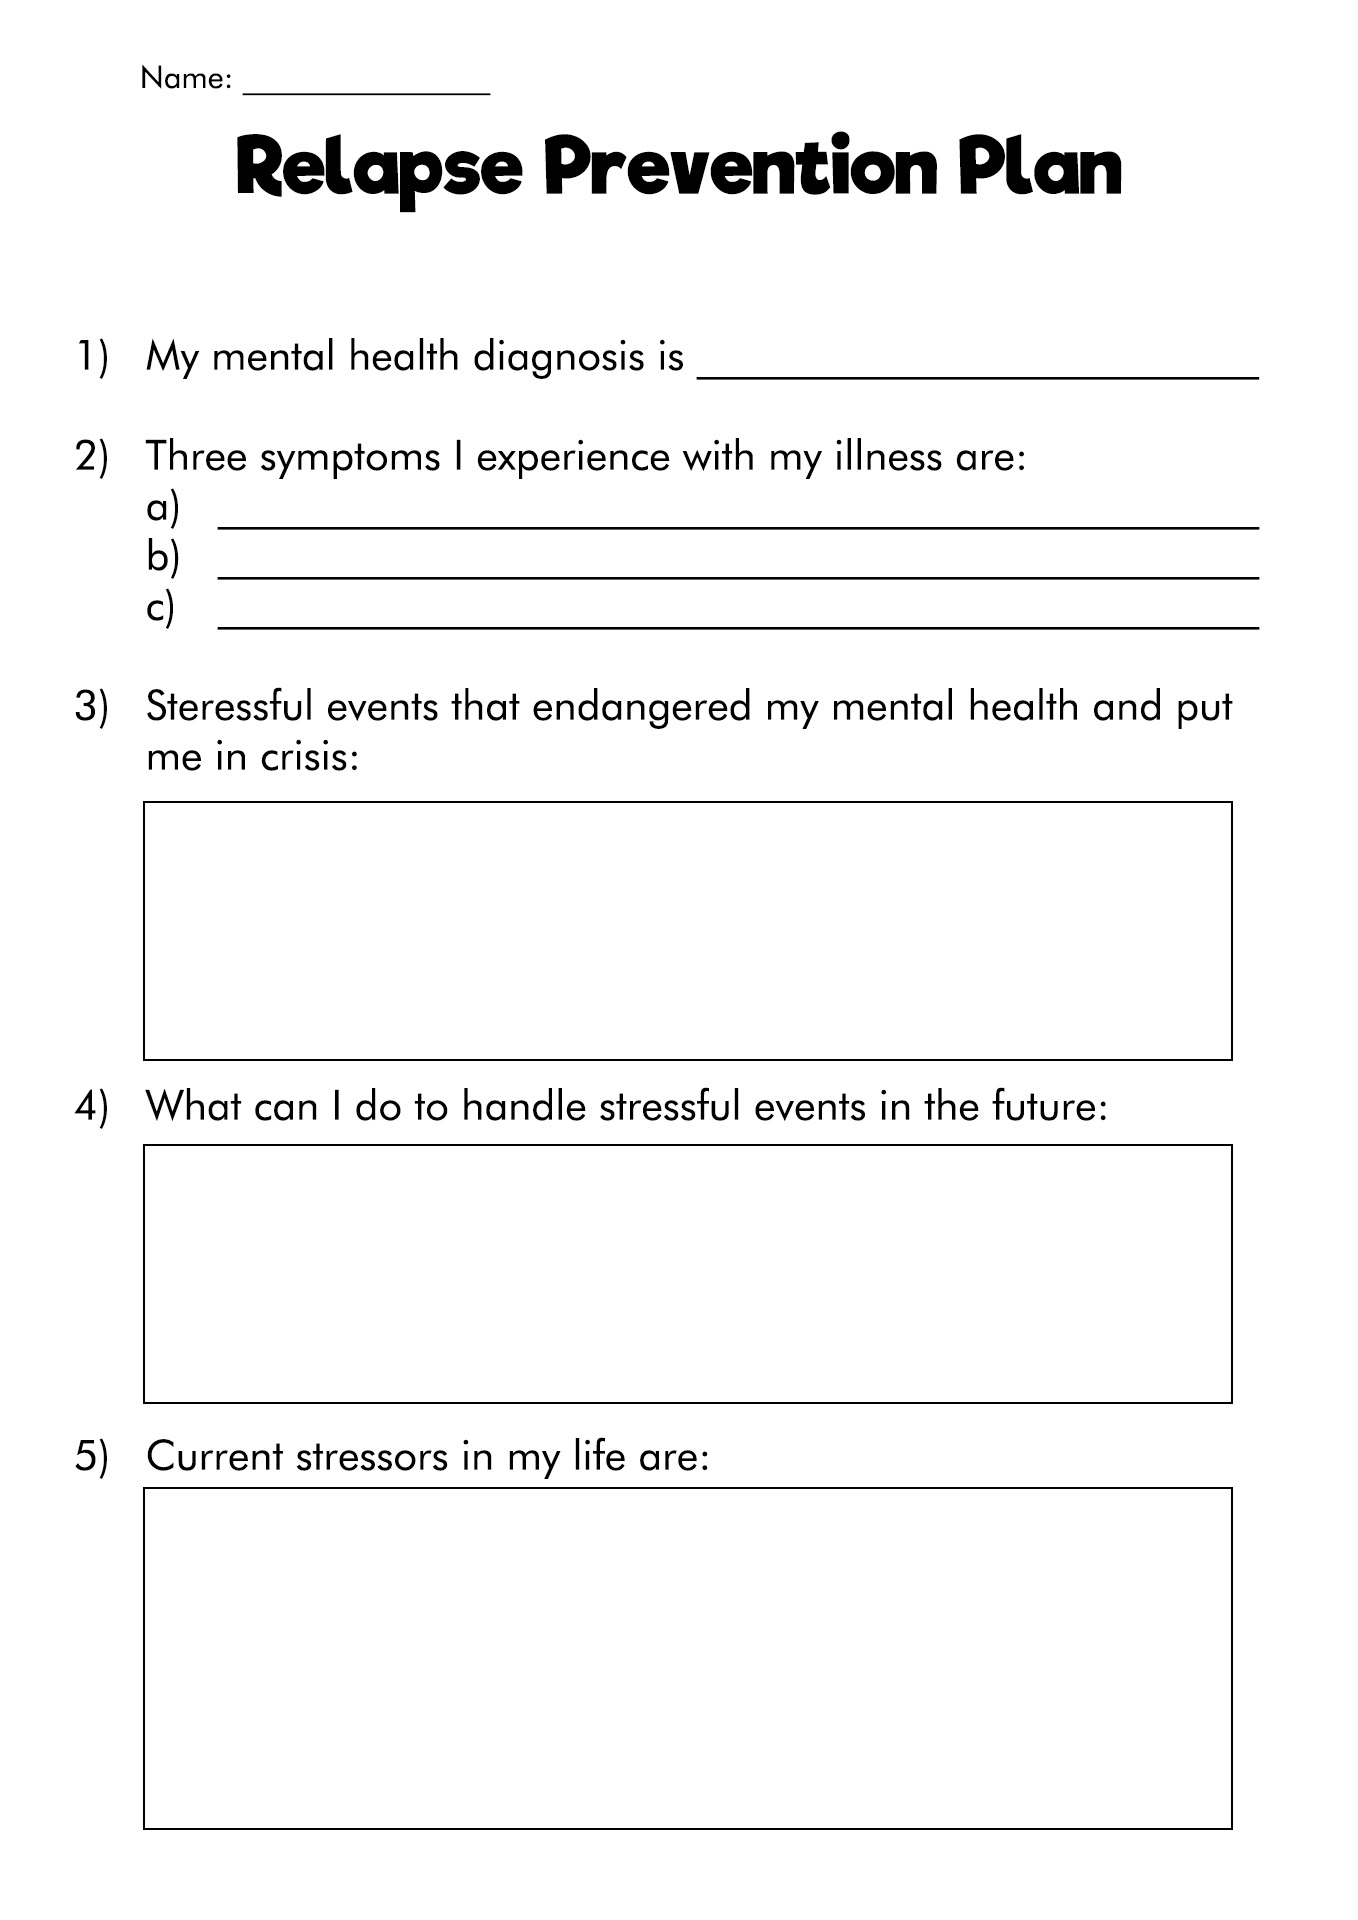 Addiction Relapse Prevention Plan Template Image